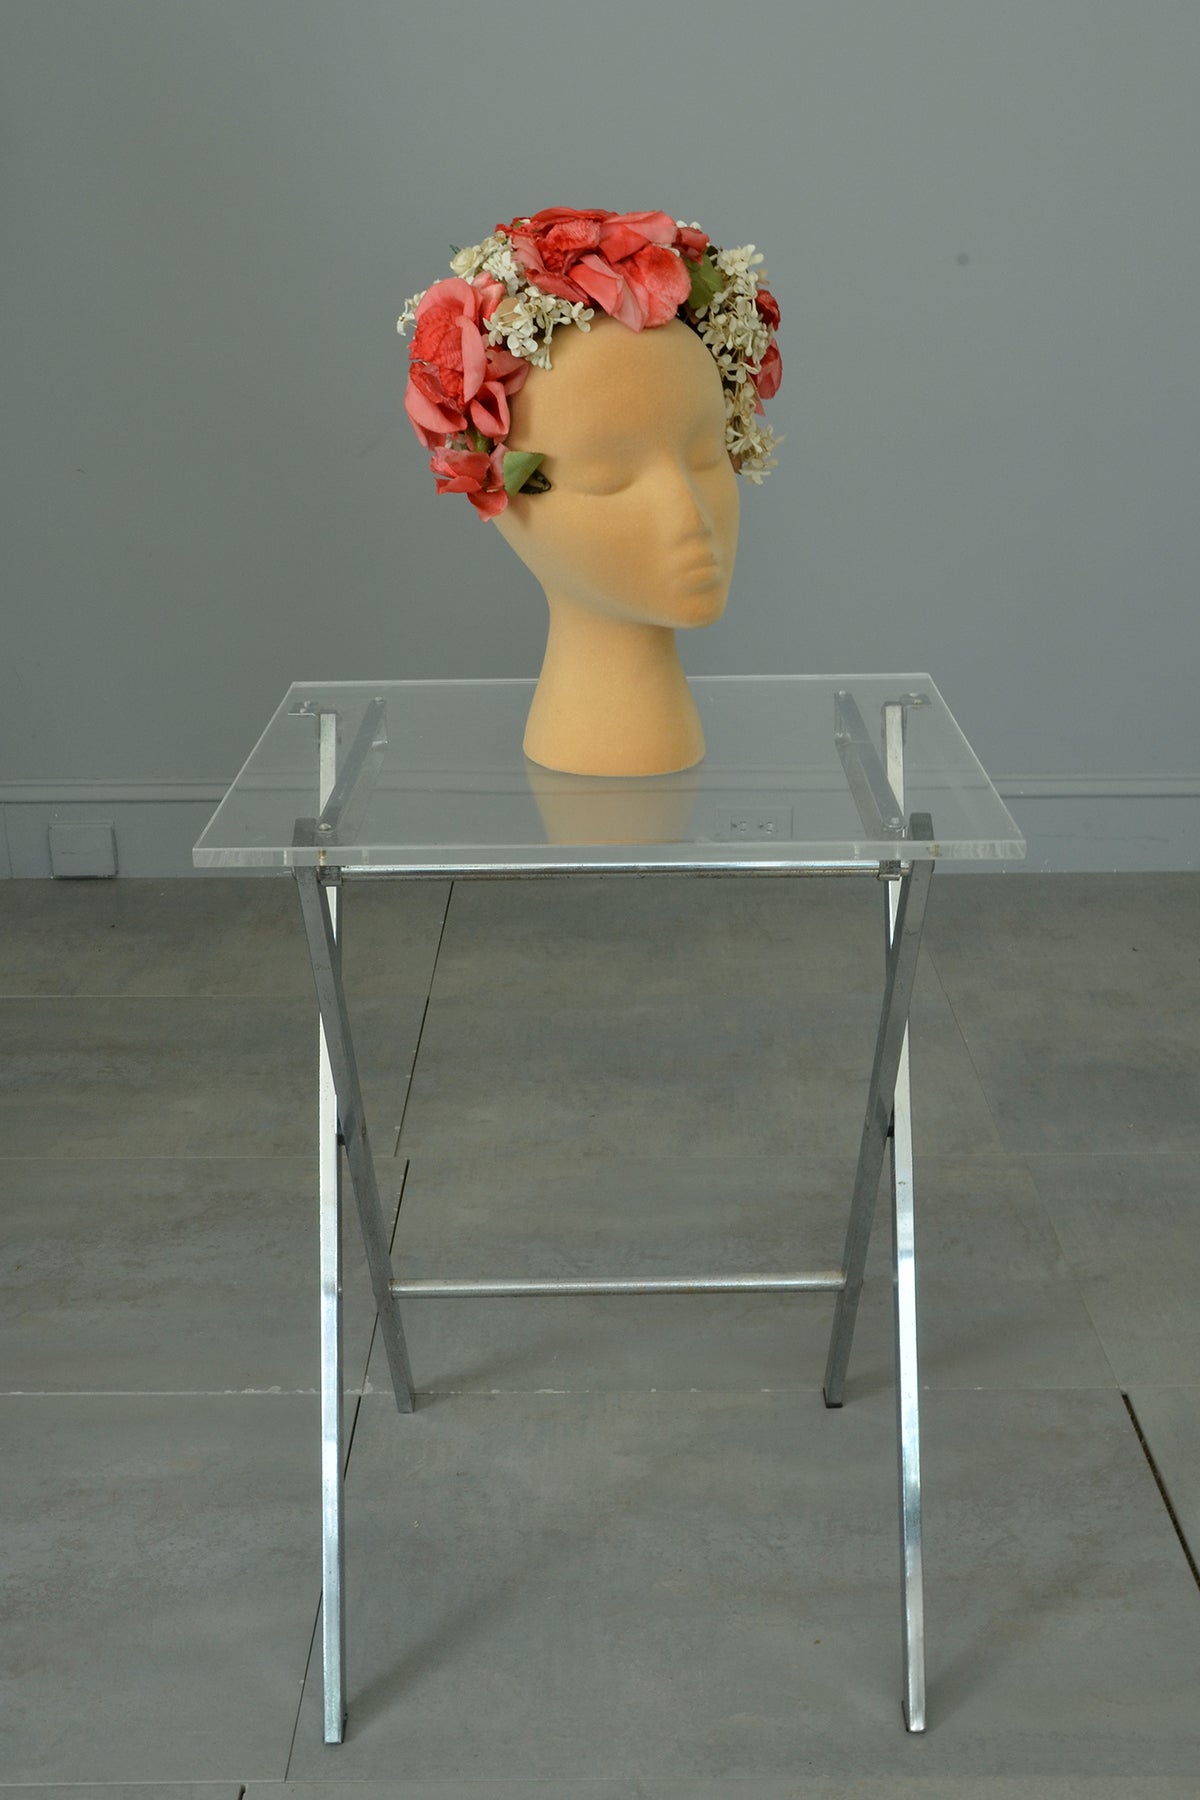 1950s Roses and Flowers Crescent Shape Headband Headpiece